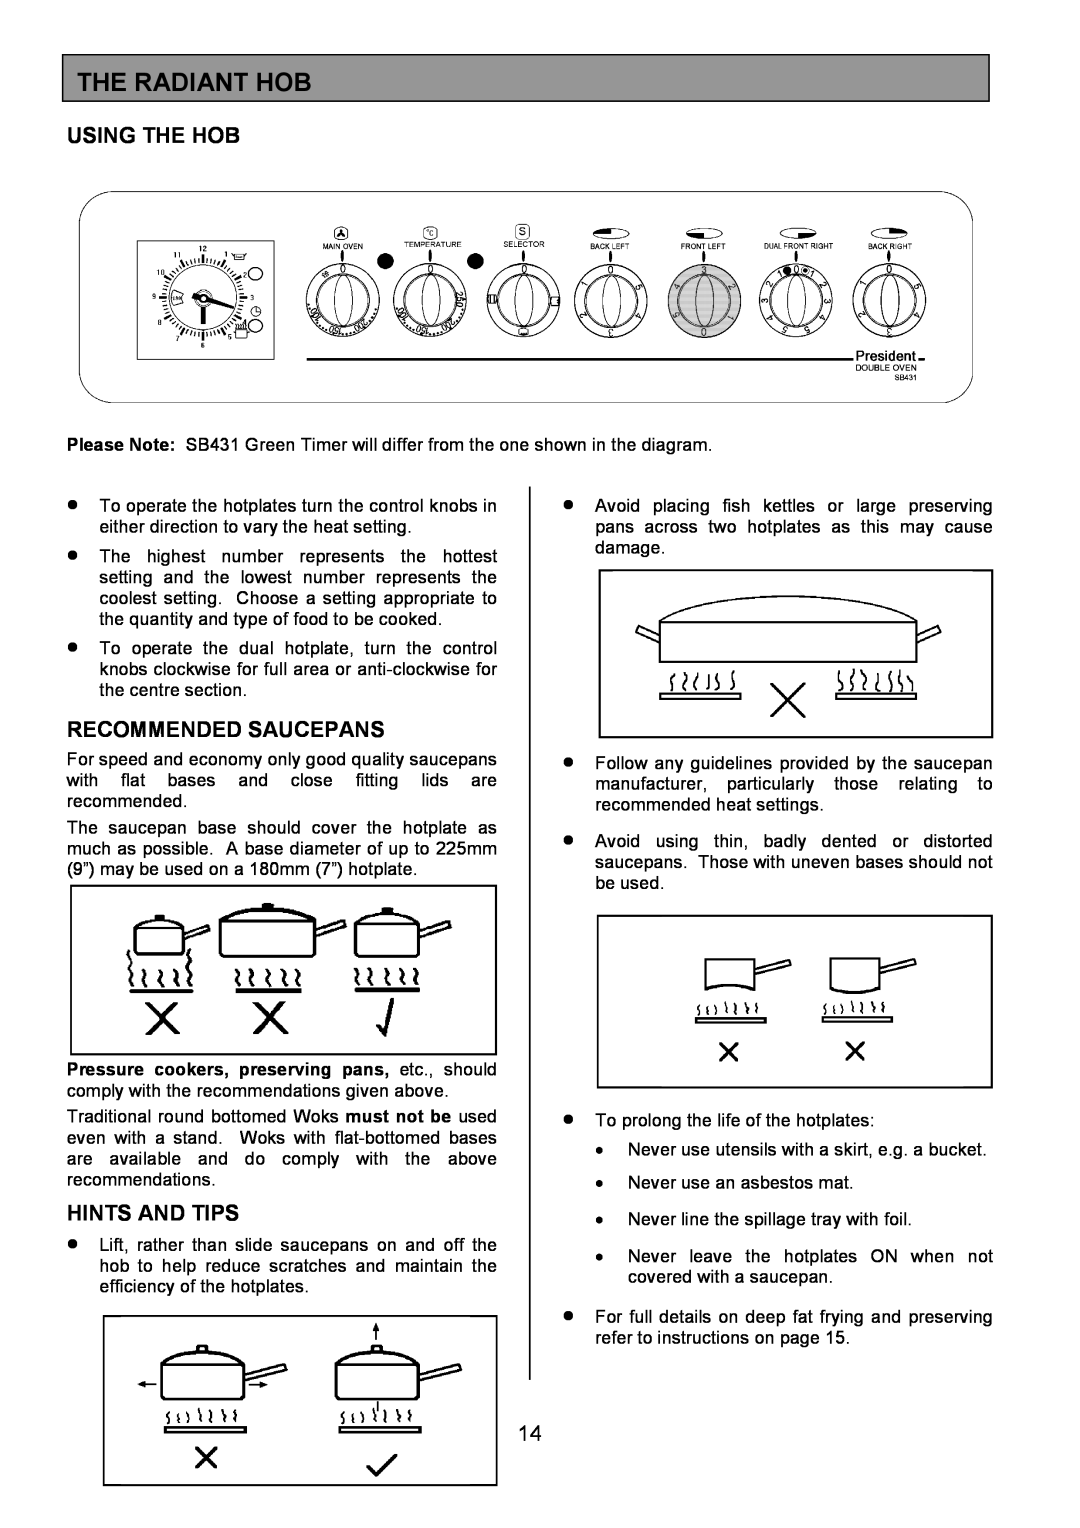 Tricity Bendix SB431 installation instructions The Radiant Hob, Using The Hob, Recommended Saucepans, Hints And Tips 